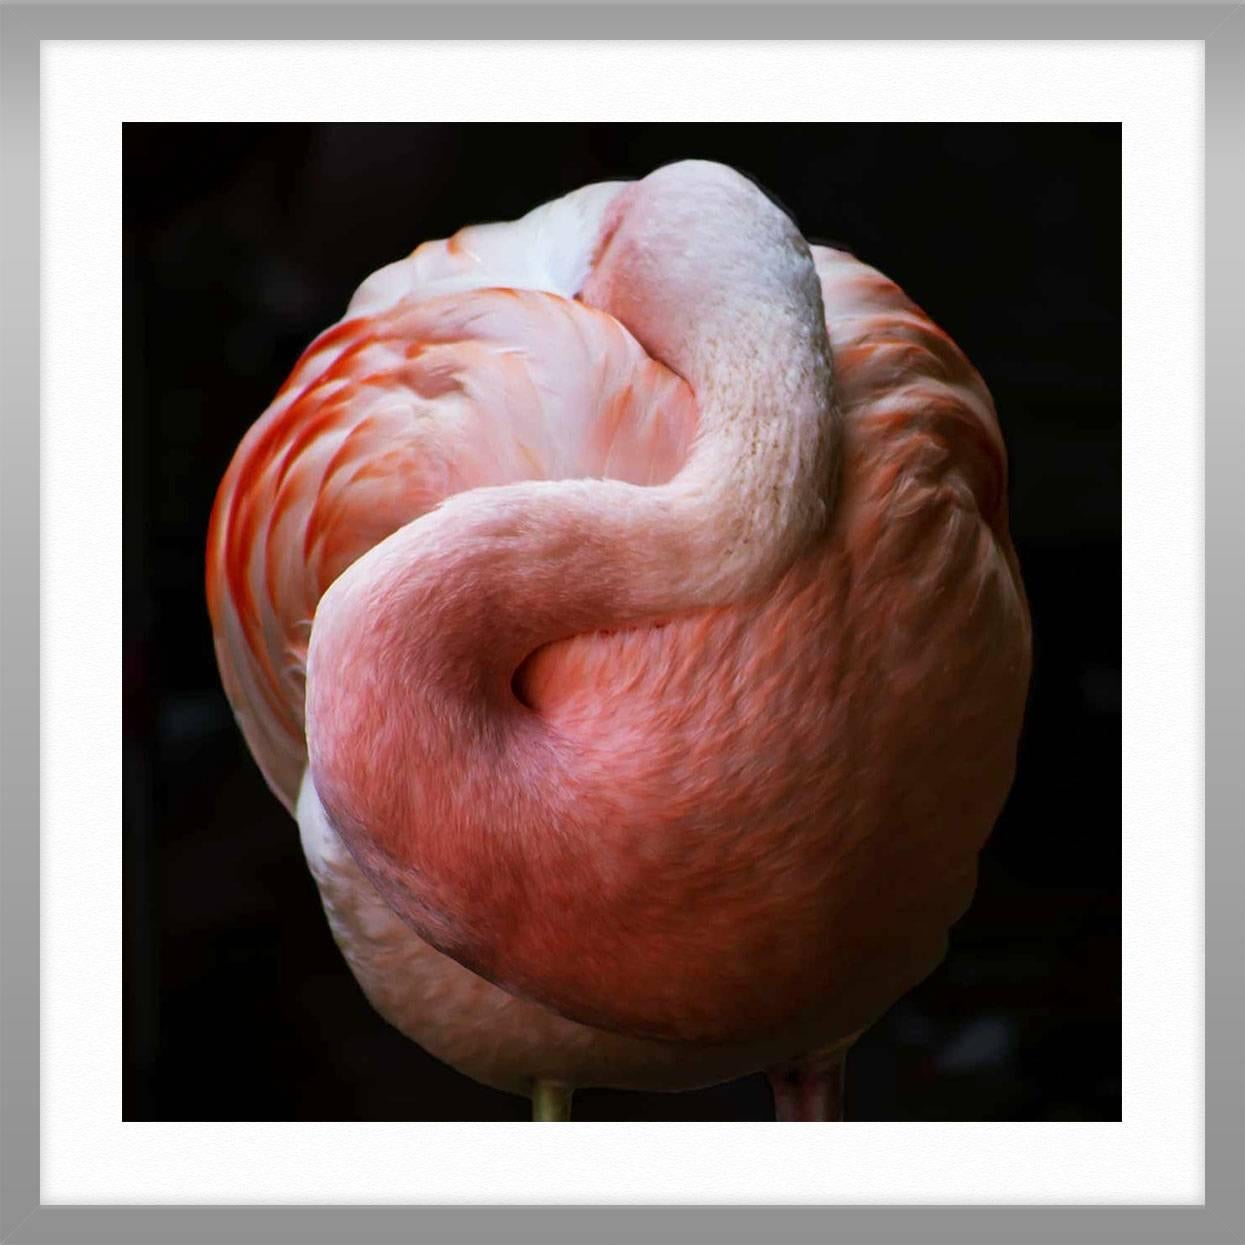 ABOUT THIS PIECE: Always having a love for photographing animals, this series explores the idea of elevating them to an almost abstract quality. Each photograph illuminates the graceful shapes and lines of the wild.

ABOUT THIS ARTIST: Halie Graham